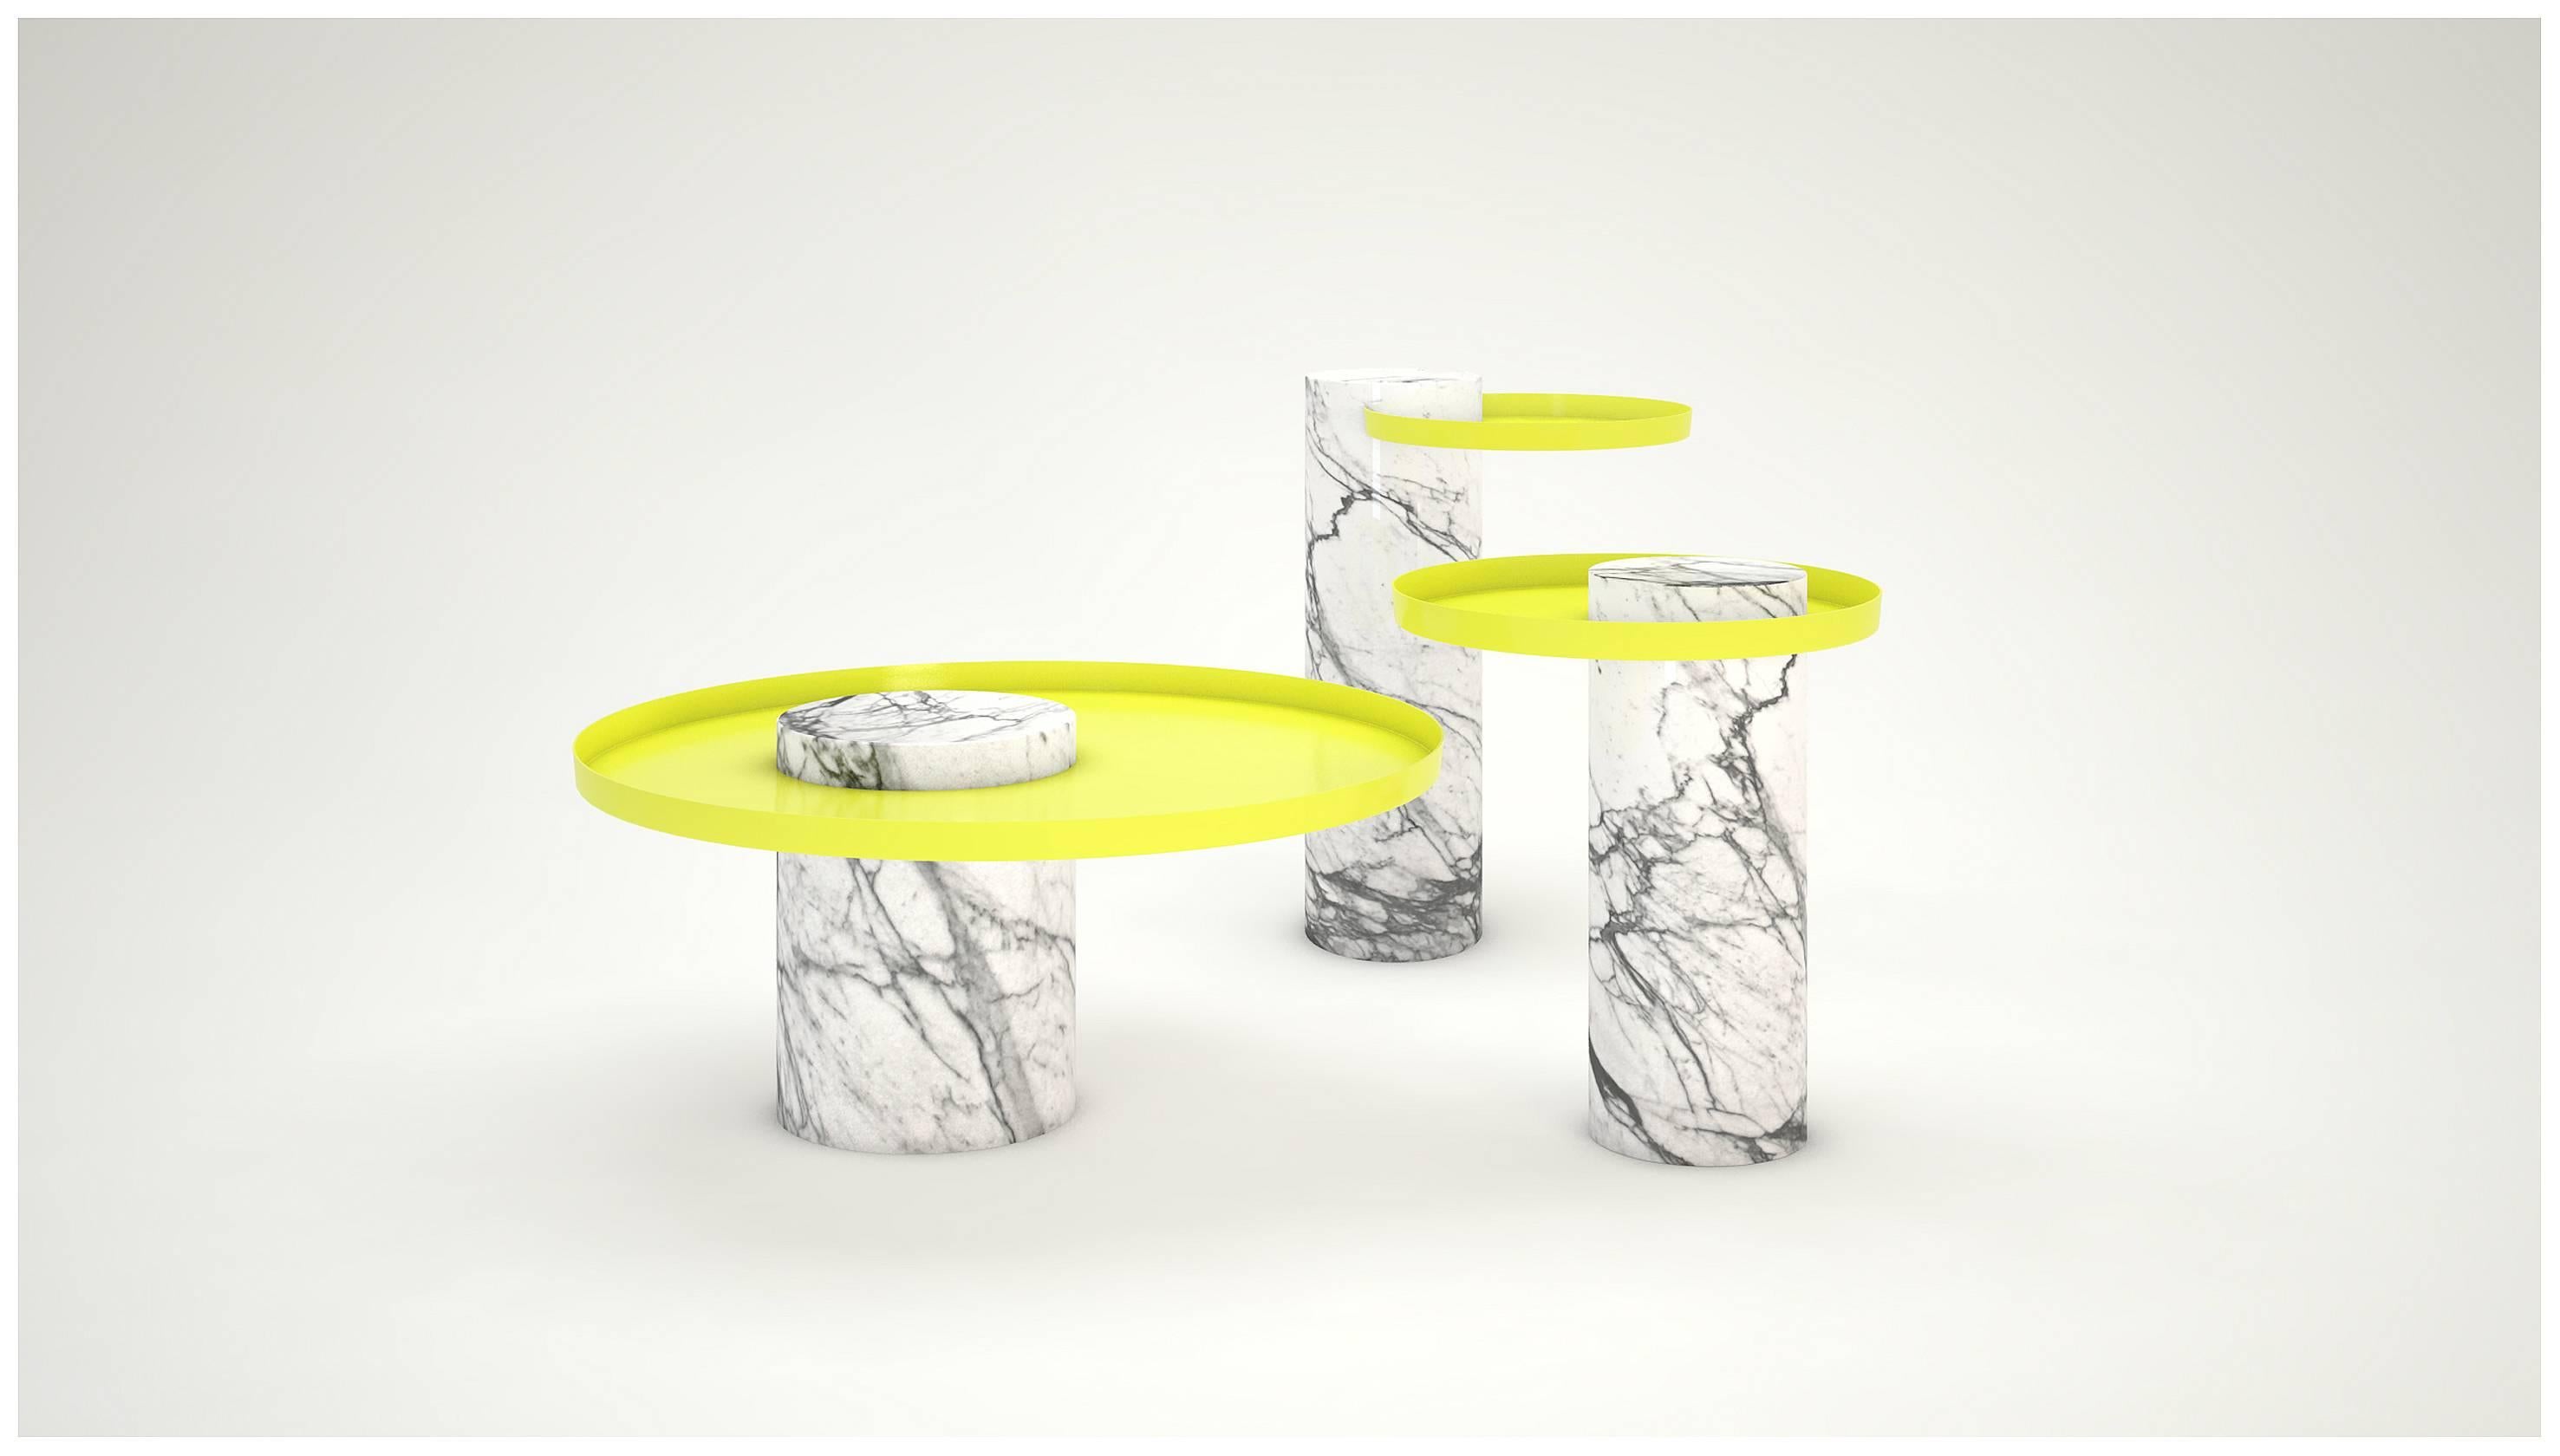 Low white marble contemporary guéridon, Sebastian Herkner.
Dimensions: D 70 x H 33 cm.
Materials: White Pele de Tigre marble, copper.

The salute table exists in 3 sizes, 4 different marble stones for the column and 5 different finishes for the